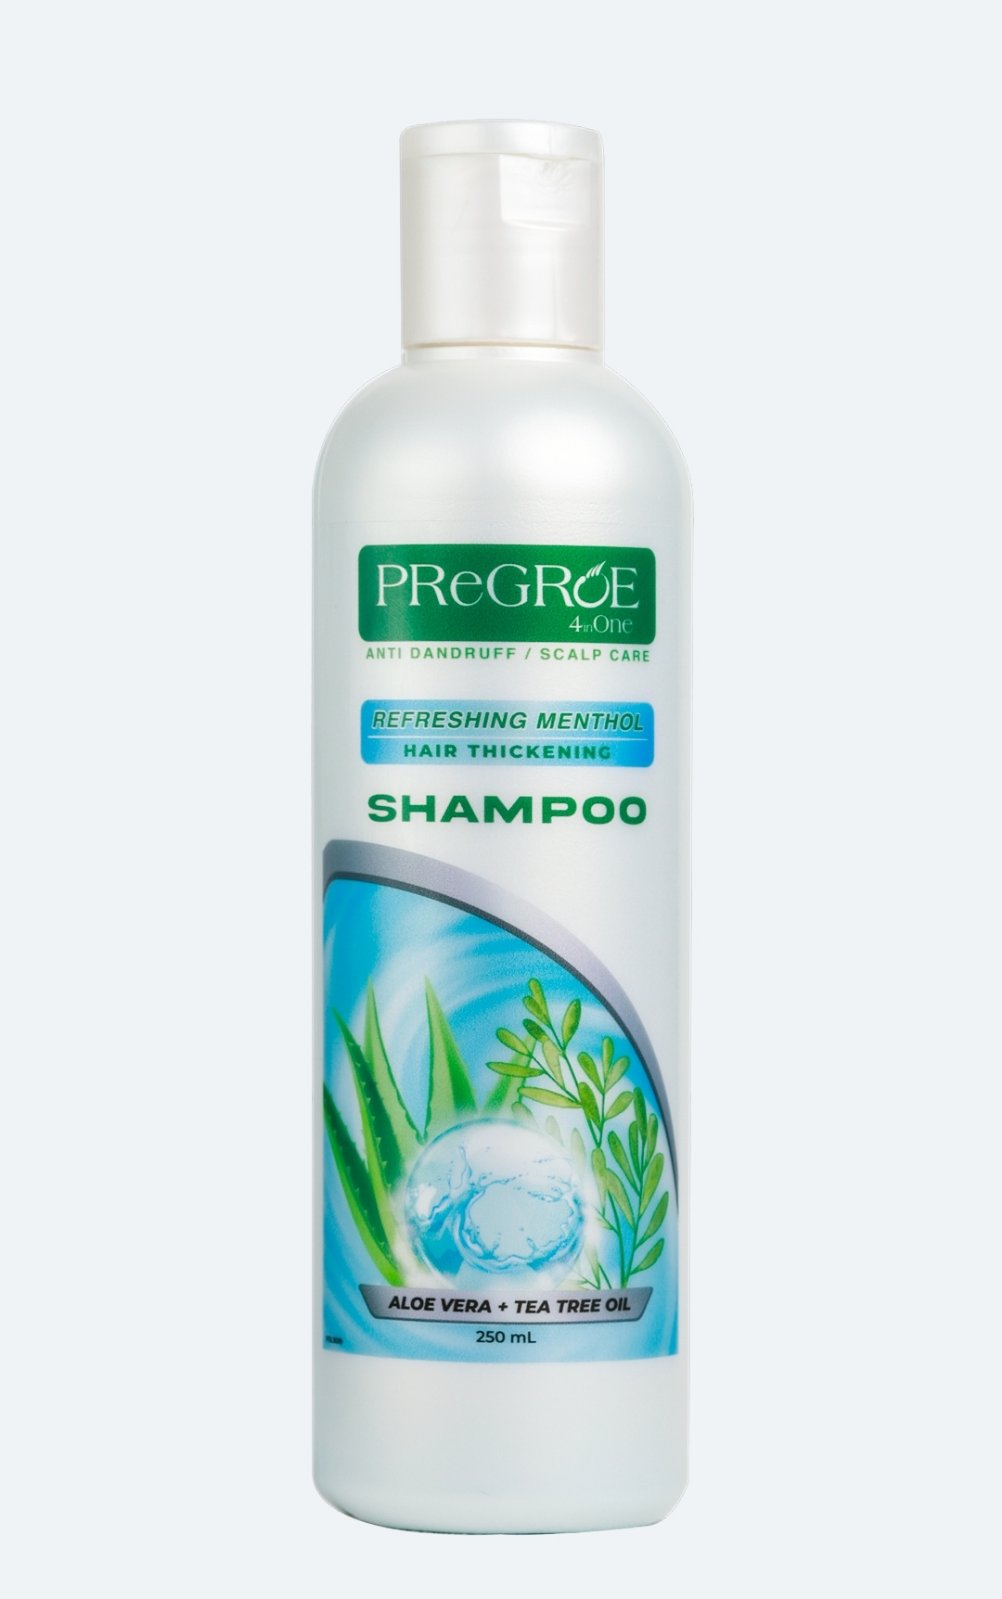 Wanna style your hair? Use Pregroe's 4 in One Thickening Gel (with